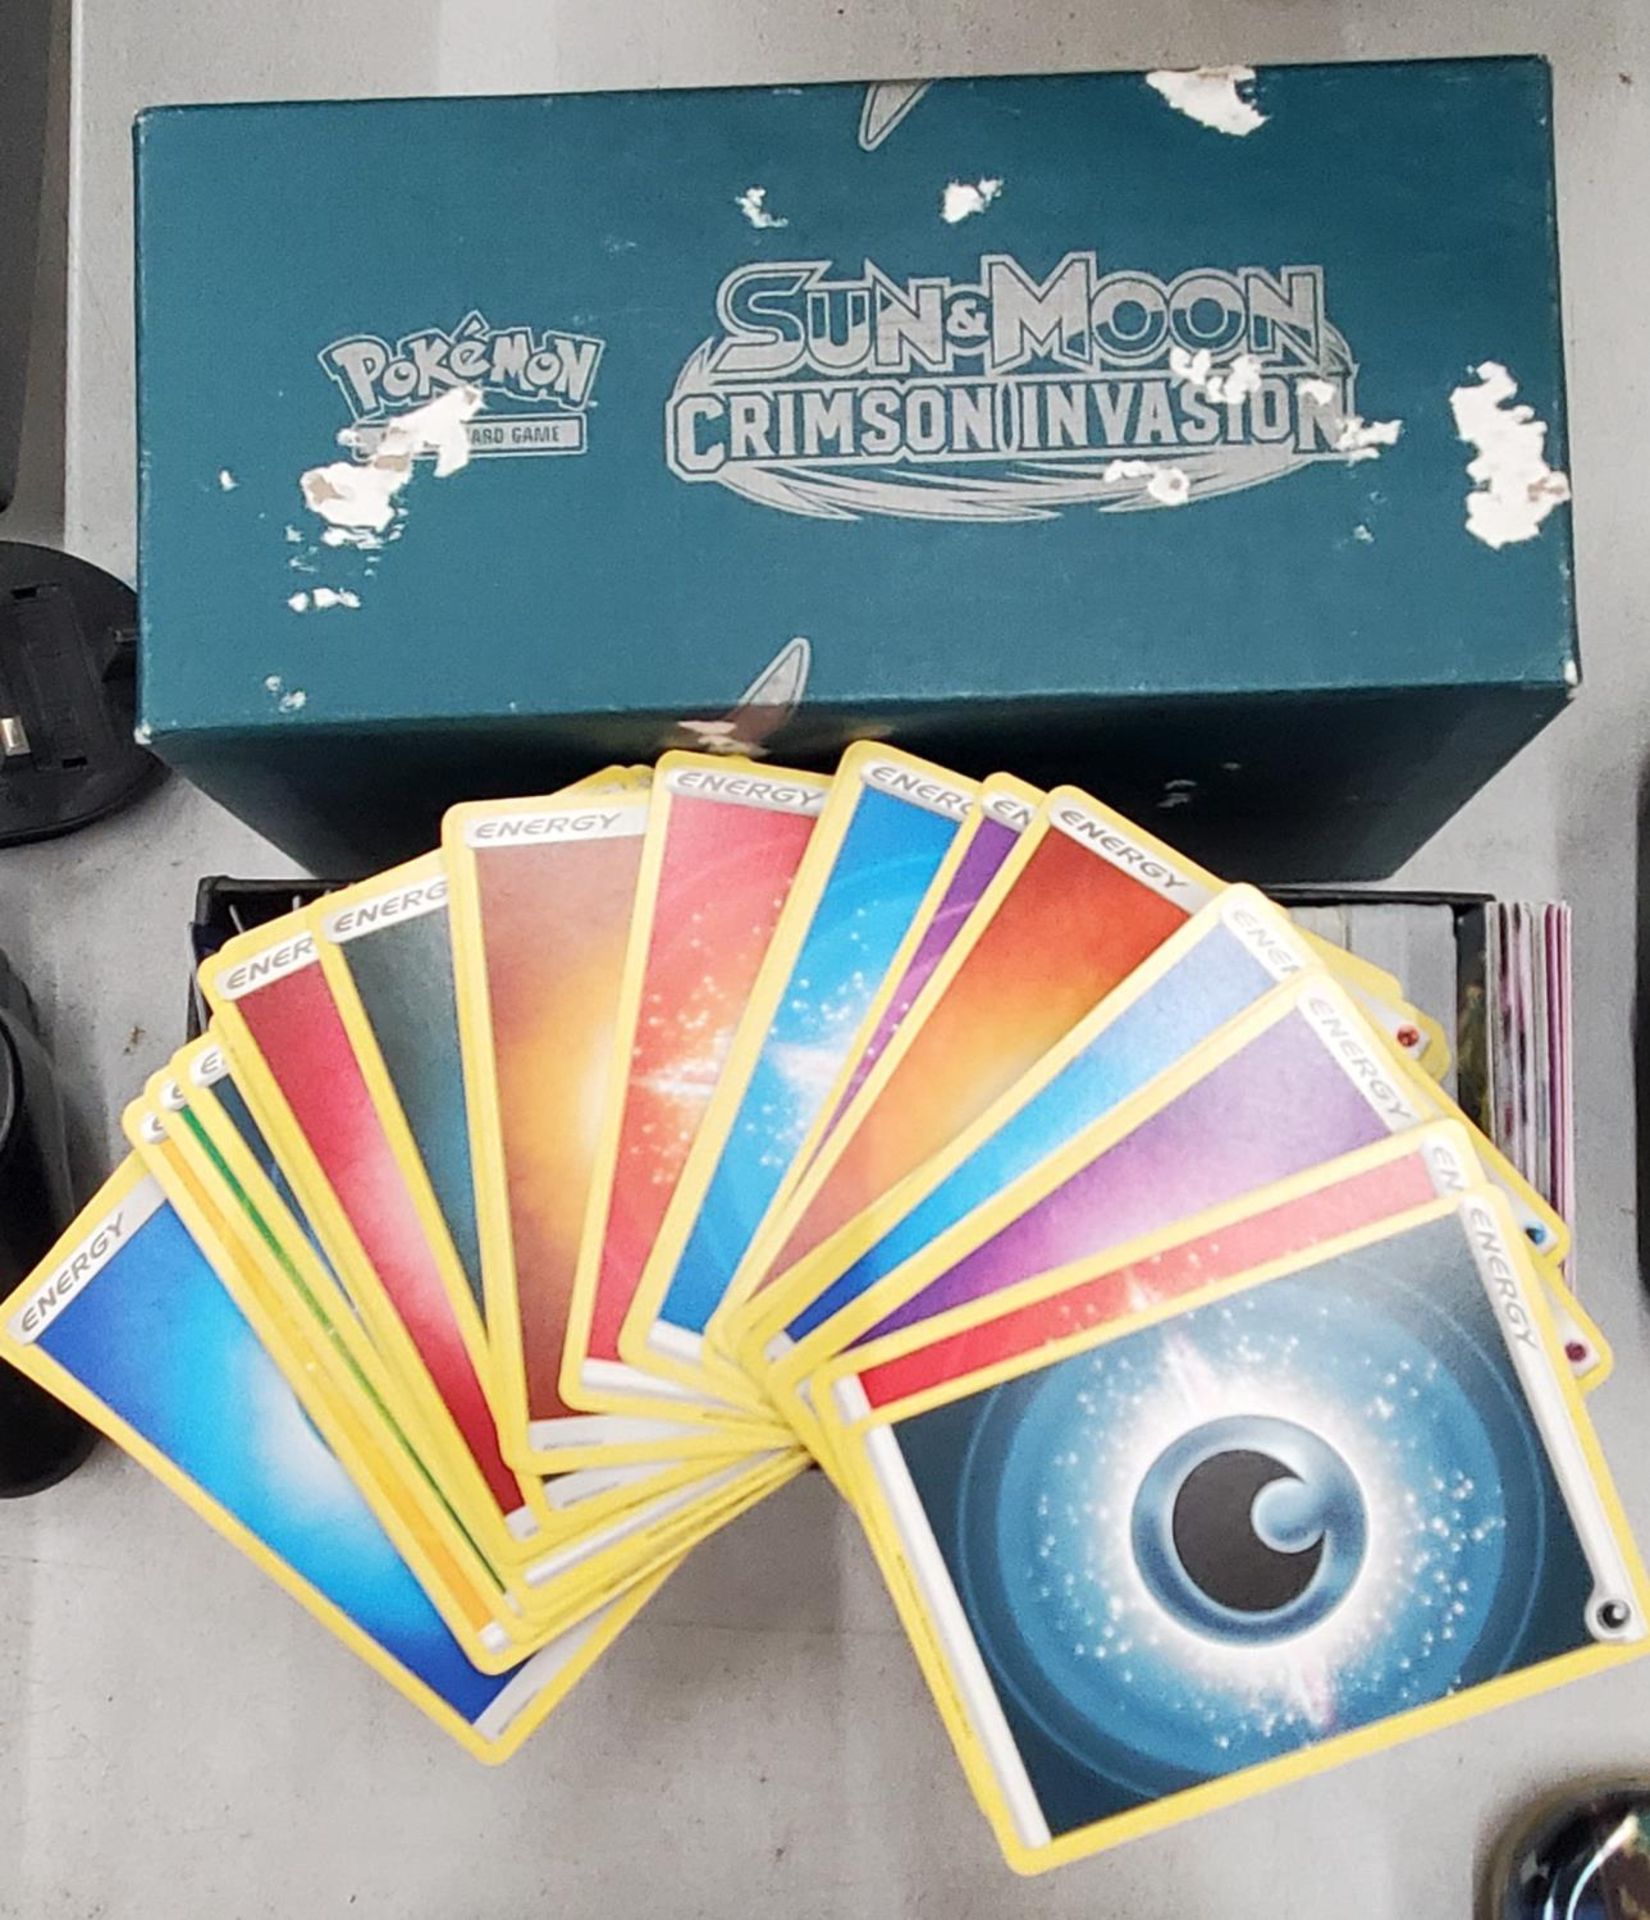 A POKEMON SUN AND MOON CRIMSON INVASION ELITE TRAINER BOX FULL OF CARDS INCLUDING HOLOS, ETC